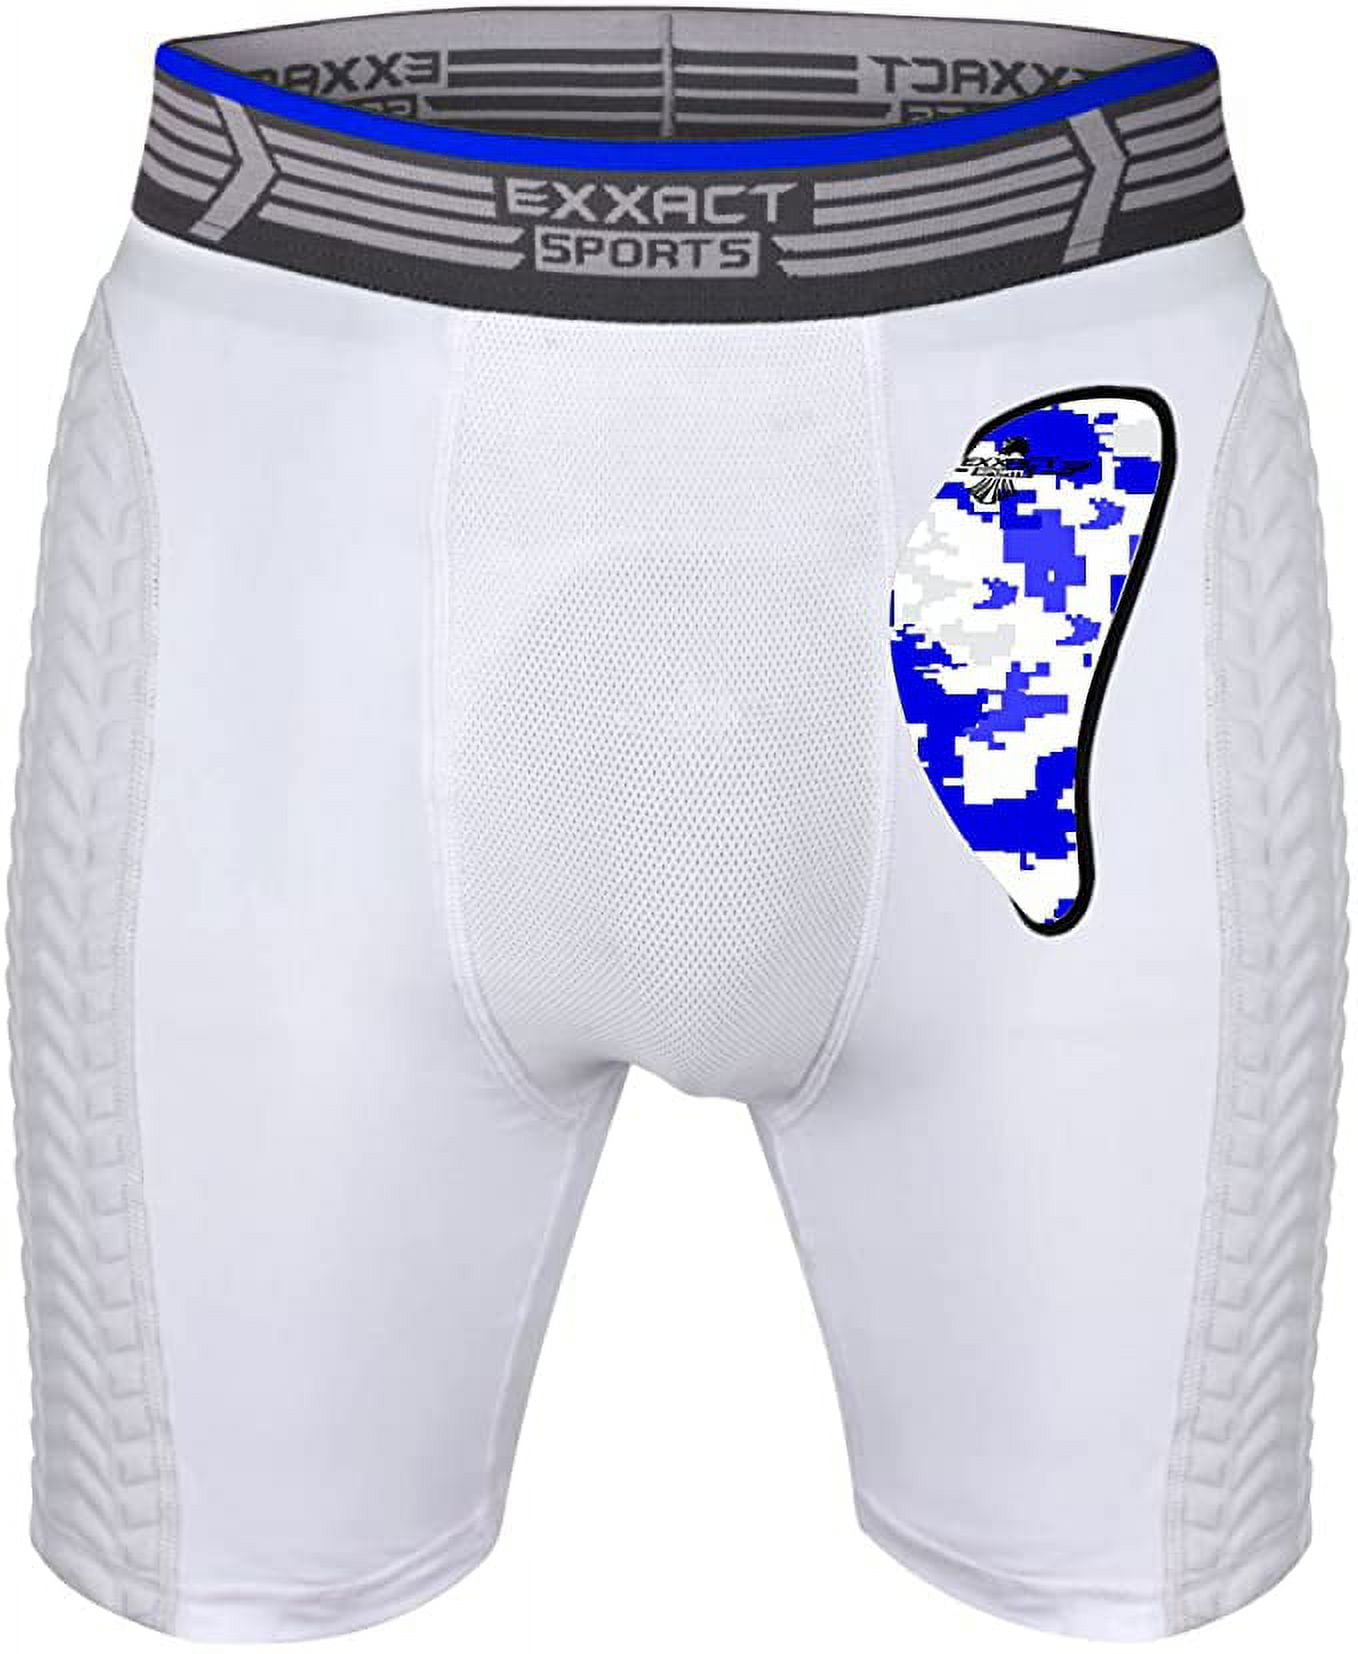 Exxact Sports Youth Baseball Sliding Shorts w/Soft Athletic Cup, Compression Fit